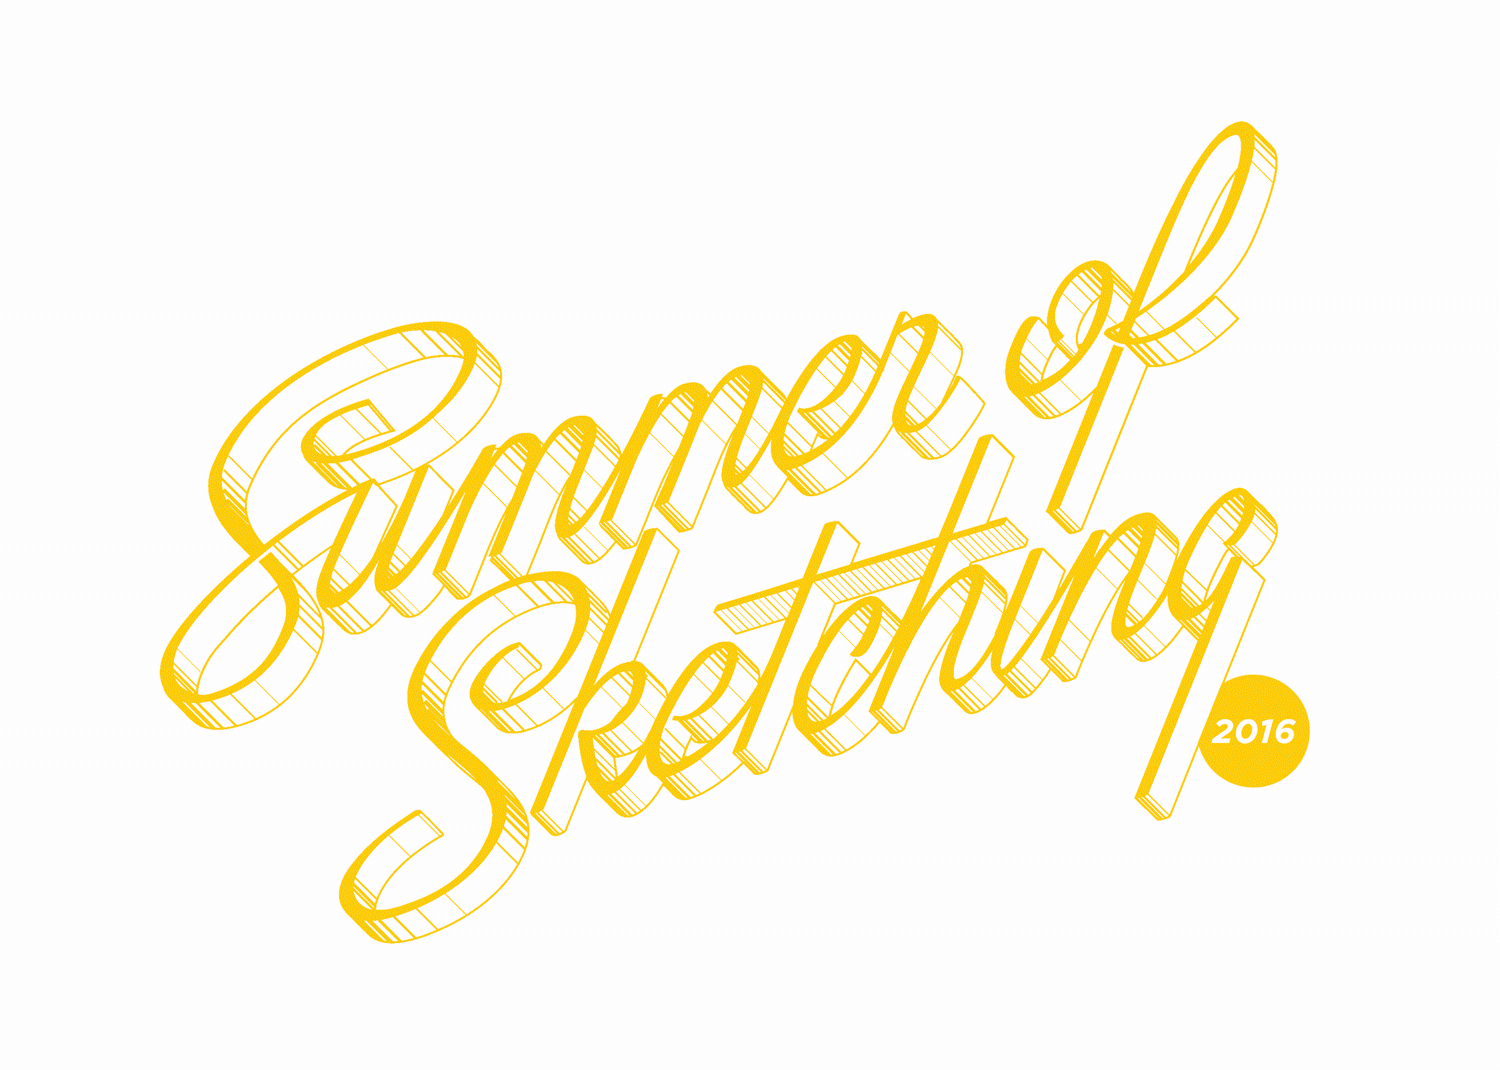 Summerofsketching-backgrounds.gif